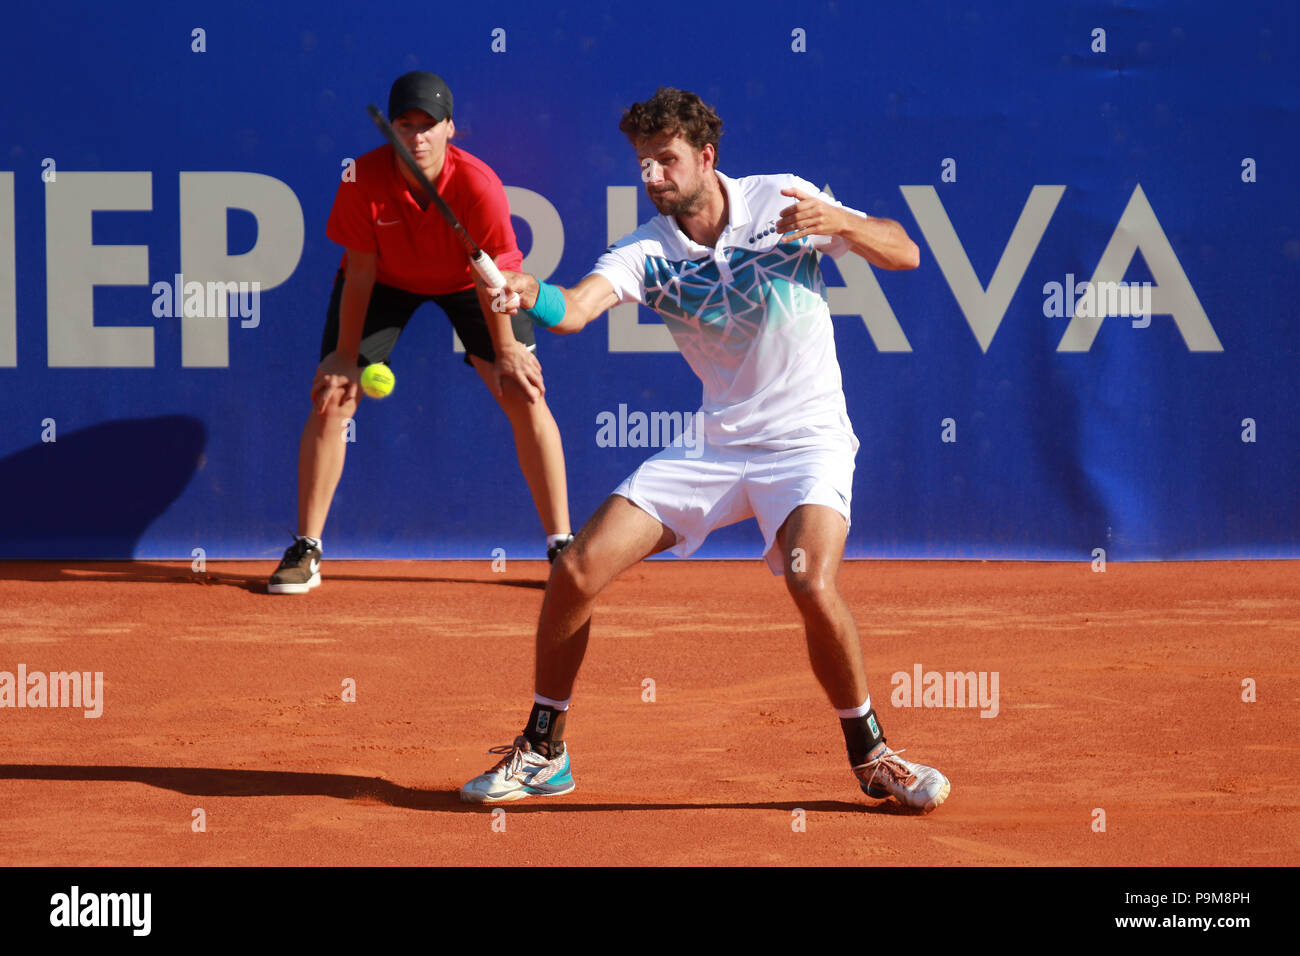 Umag, CROATIA, Umag: Robin Haase of Holland hits a return to Martin Klizan of Slovakia during the singles match Klizan v Haase at the ATP 29th Plava laguna Croatia Open Umag tournament at the at the Goran Ivanisevic ATP Stadium, on July 19, 2018 in Umag. Credit: Andrea Spinelli/Alamy Live News Stock Photo